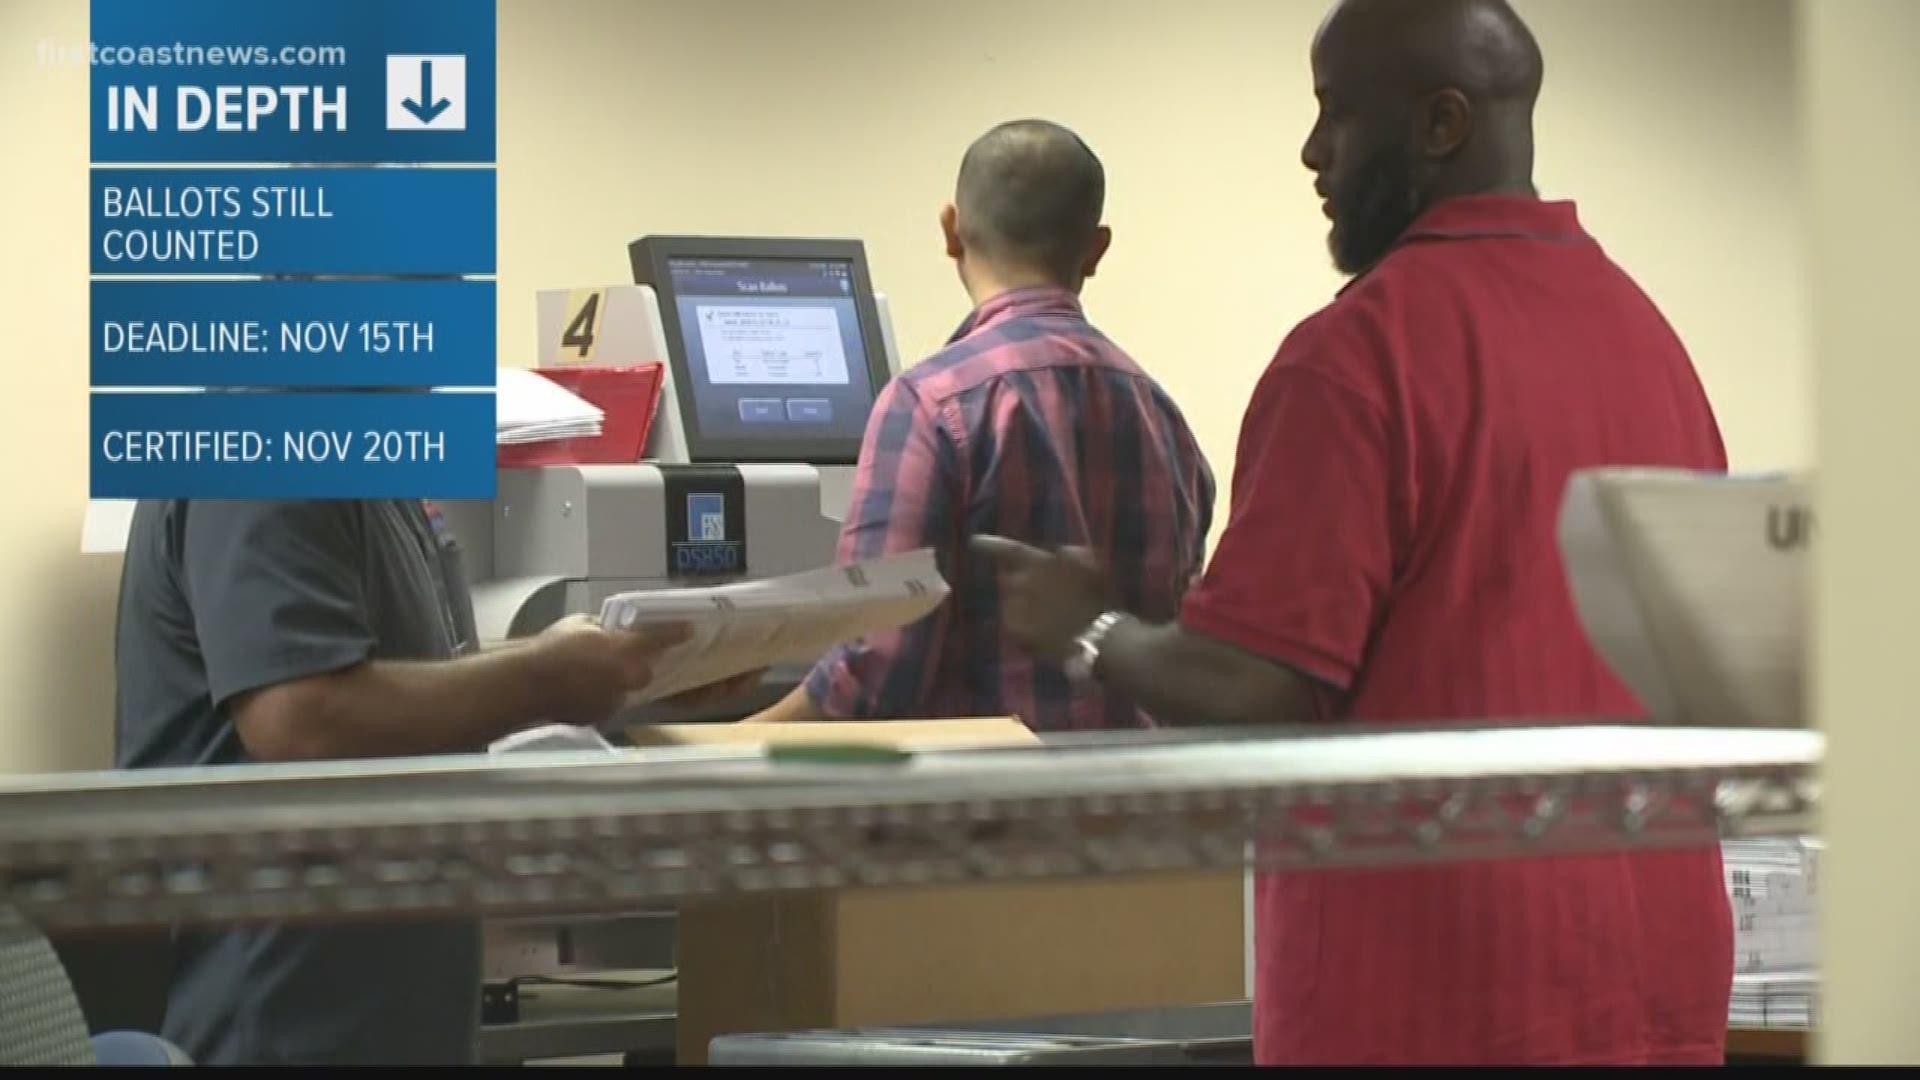 Due to a faulty machine, some 15,000 ballots were not counted in Duval County.